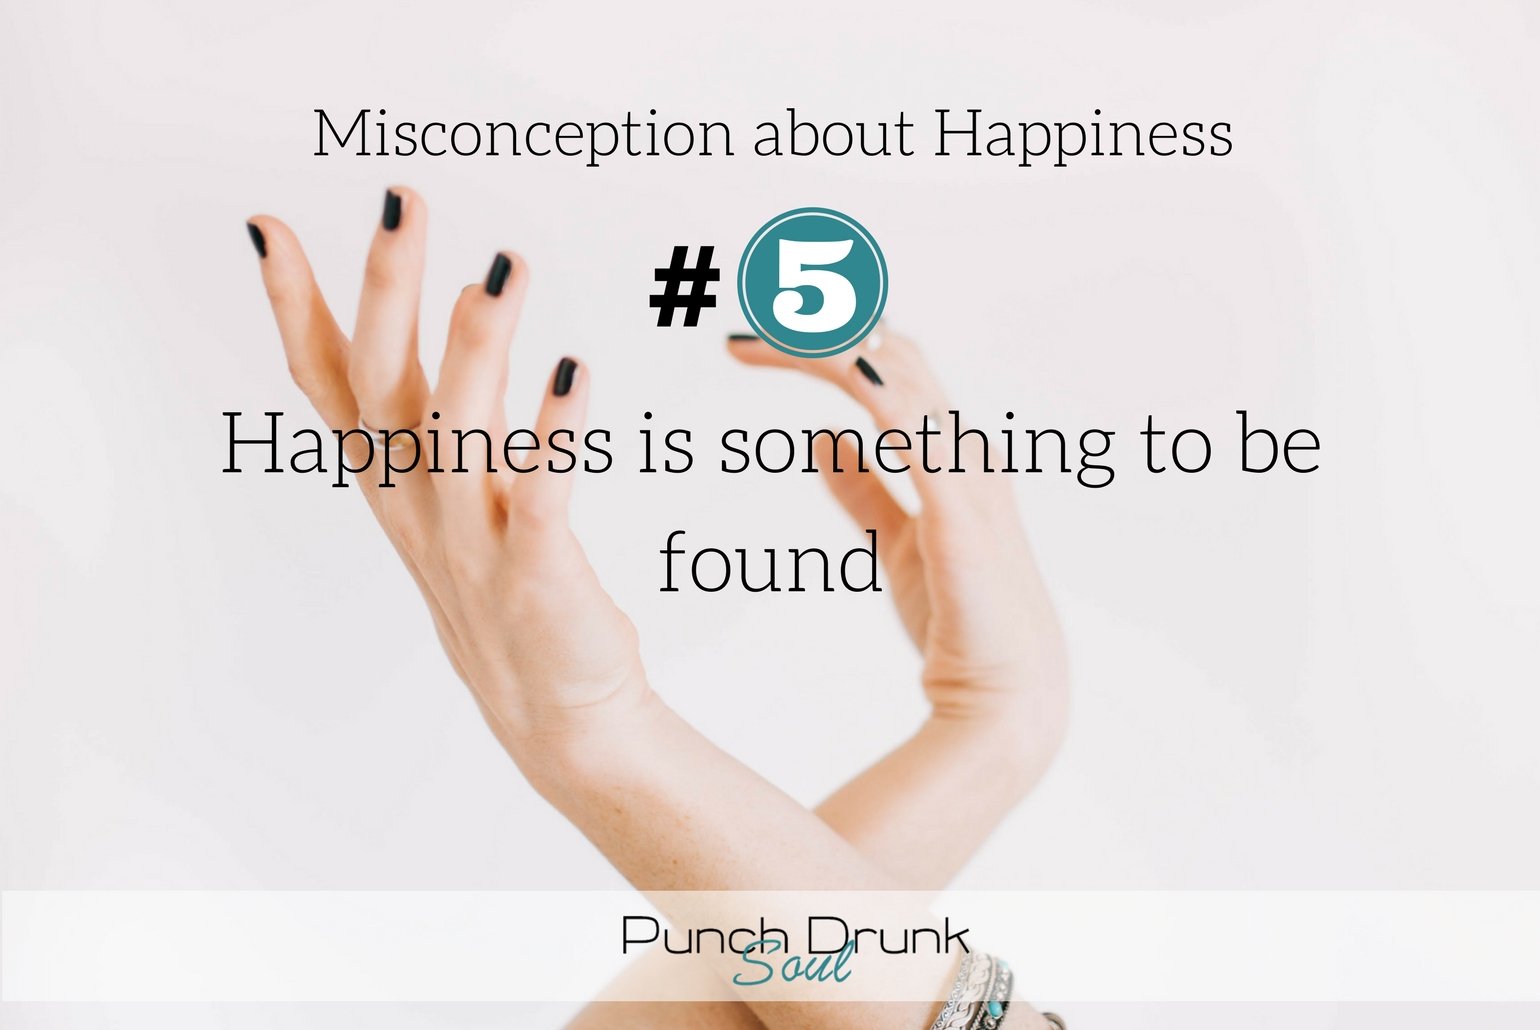 Misconceptions about happiness, How to be happy, pursuit of happiness, happiness, being happy, Key to happiness, how to find happiness